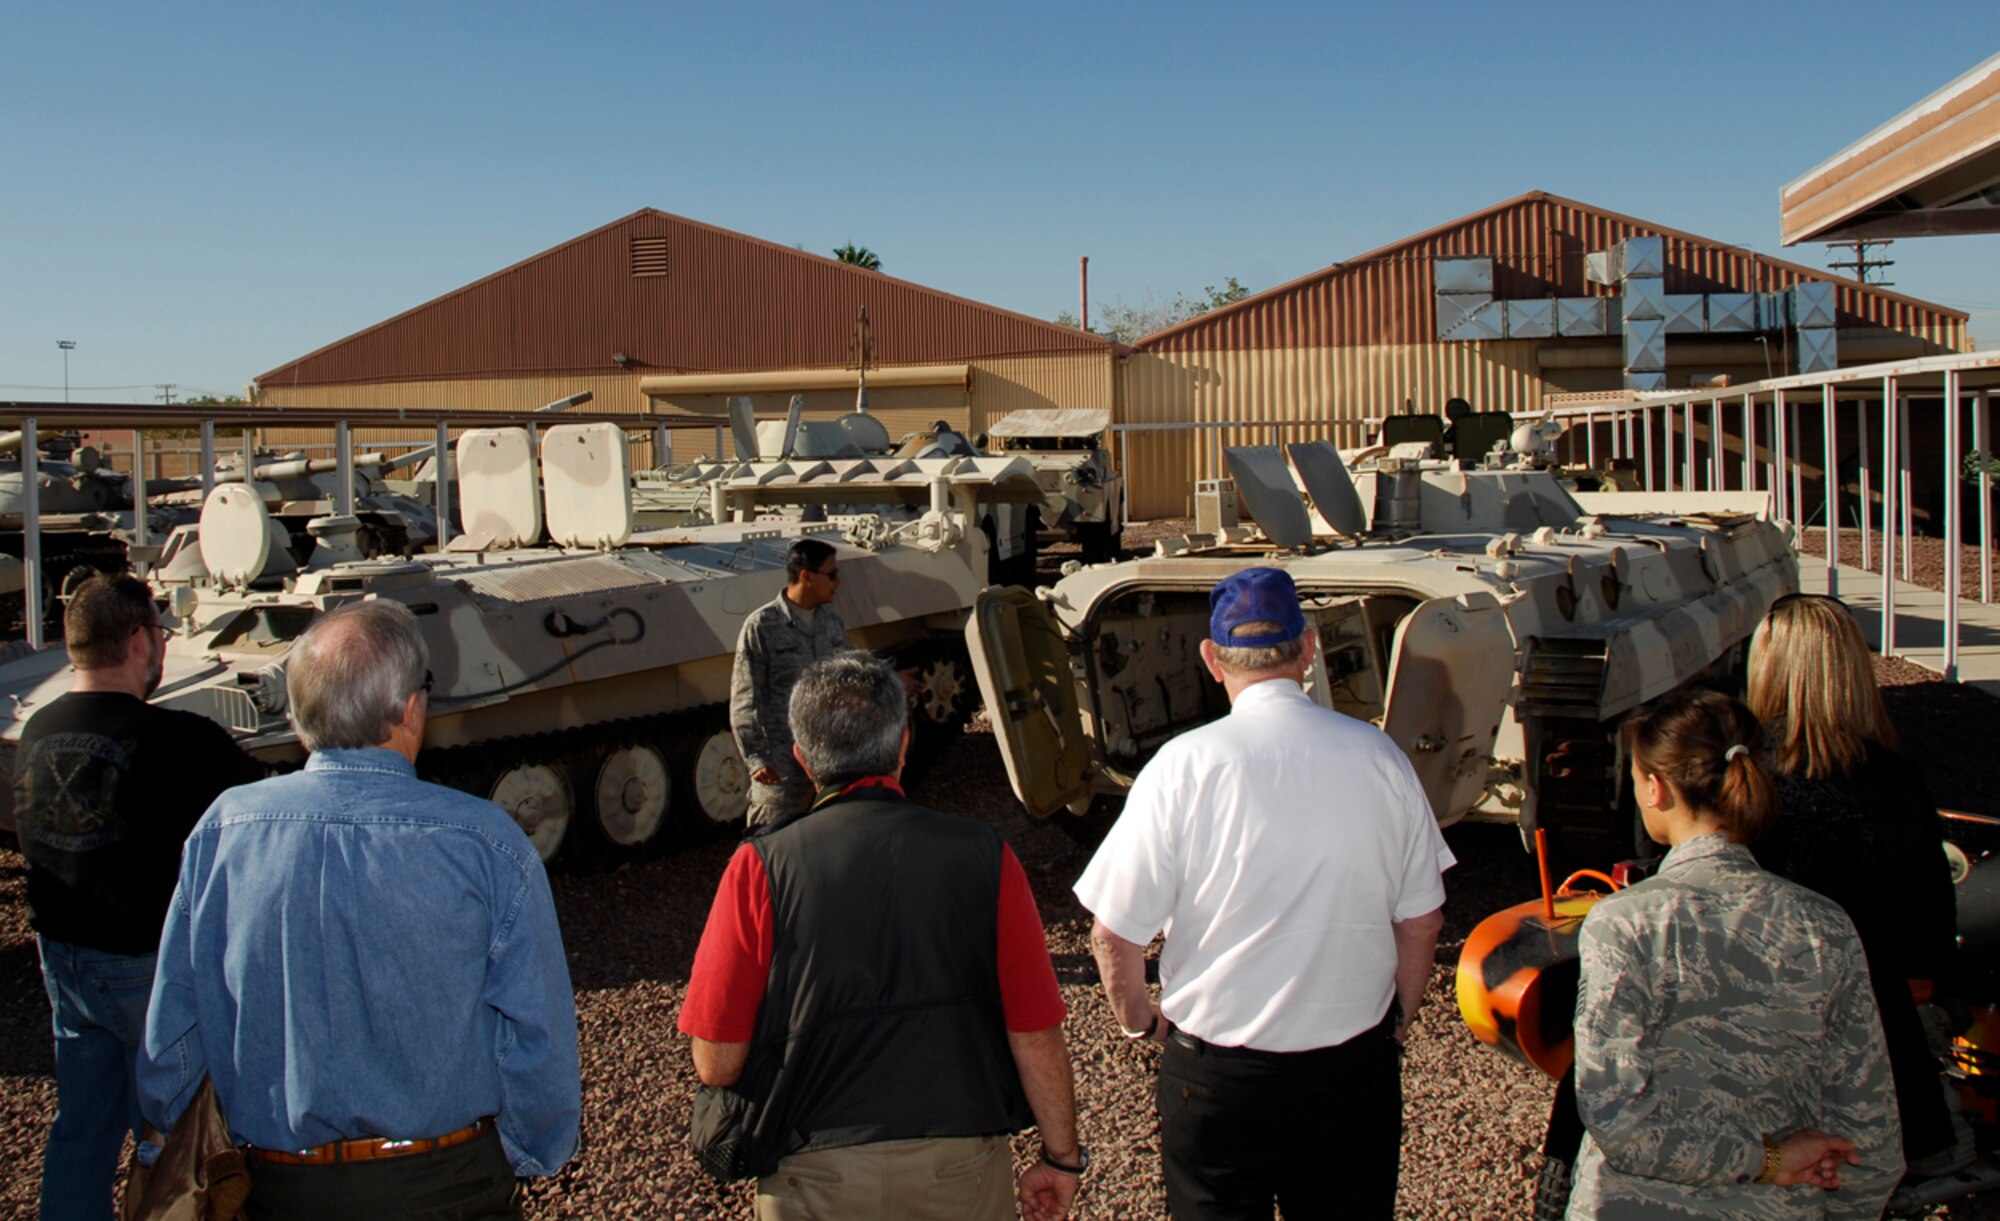 Members of the 188th Fighter Wing along with employees of the Federal Aviation Administration (FAA) and local Arkansas media look on during a guided tour of the 547th Intelligence Squadron's Threat Systems Area, informally dubbed "The Petting Zoo," at Nellis Air Force Base, Nev., Oct. 15 during a civic tour to the base. The primary objective was to observe the 188th's deployment preparations for the unit's upcoming Aerospace Expeditionary Force (AEF) rotation in Afghanistan in spring 2010. (U.S. Air Force photo by Senior Master Sgt. Dennis Brambl/188th Fighter Wing Public Affairs) 